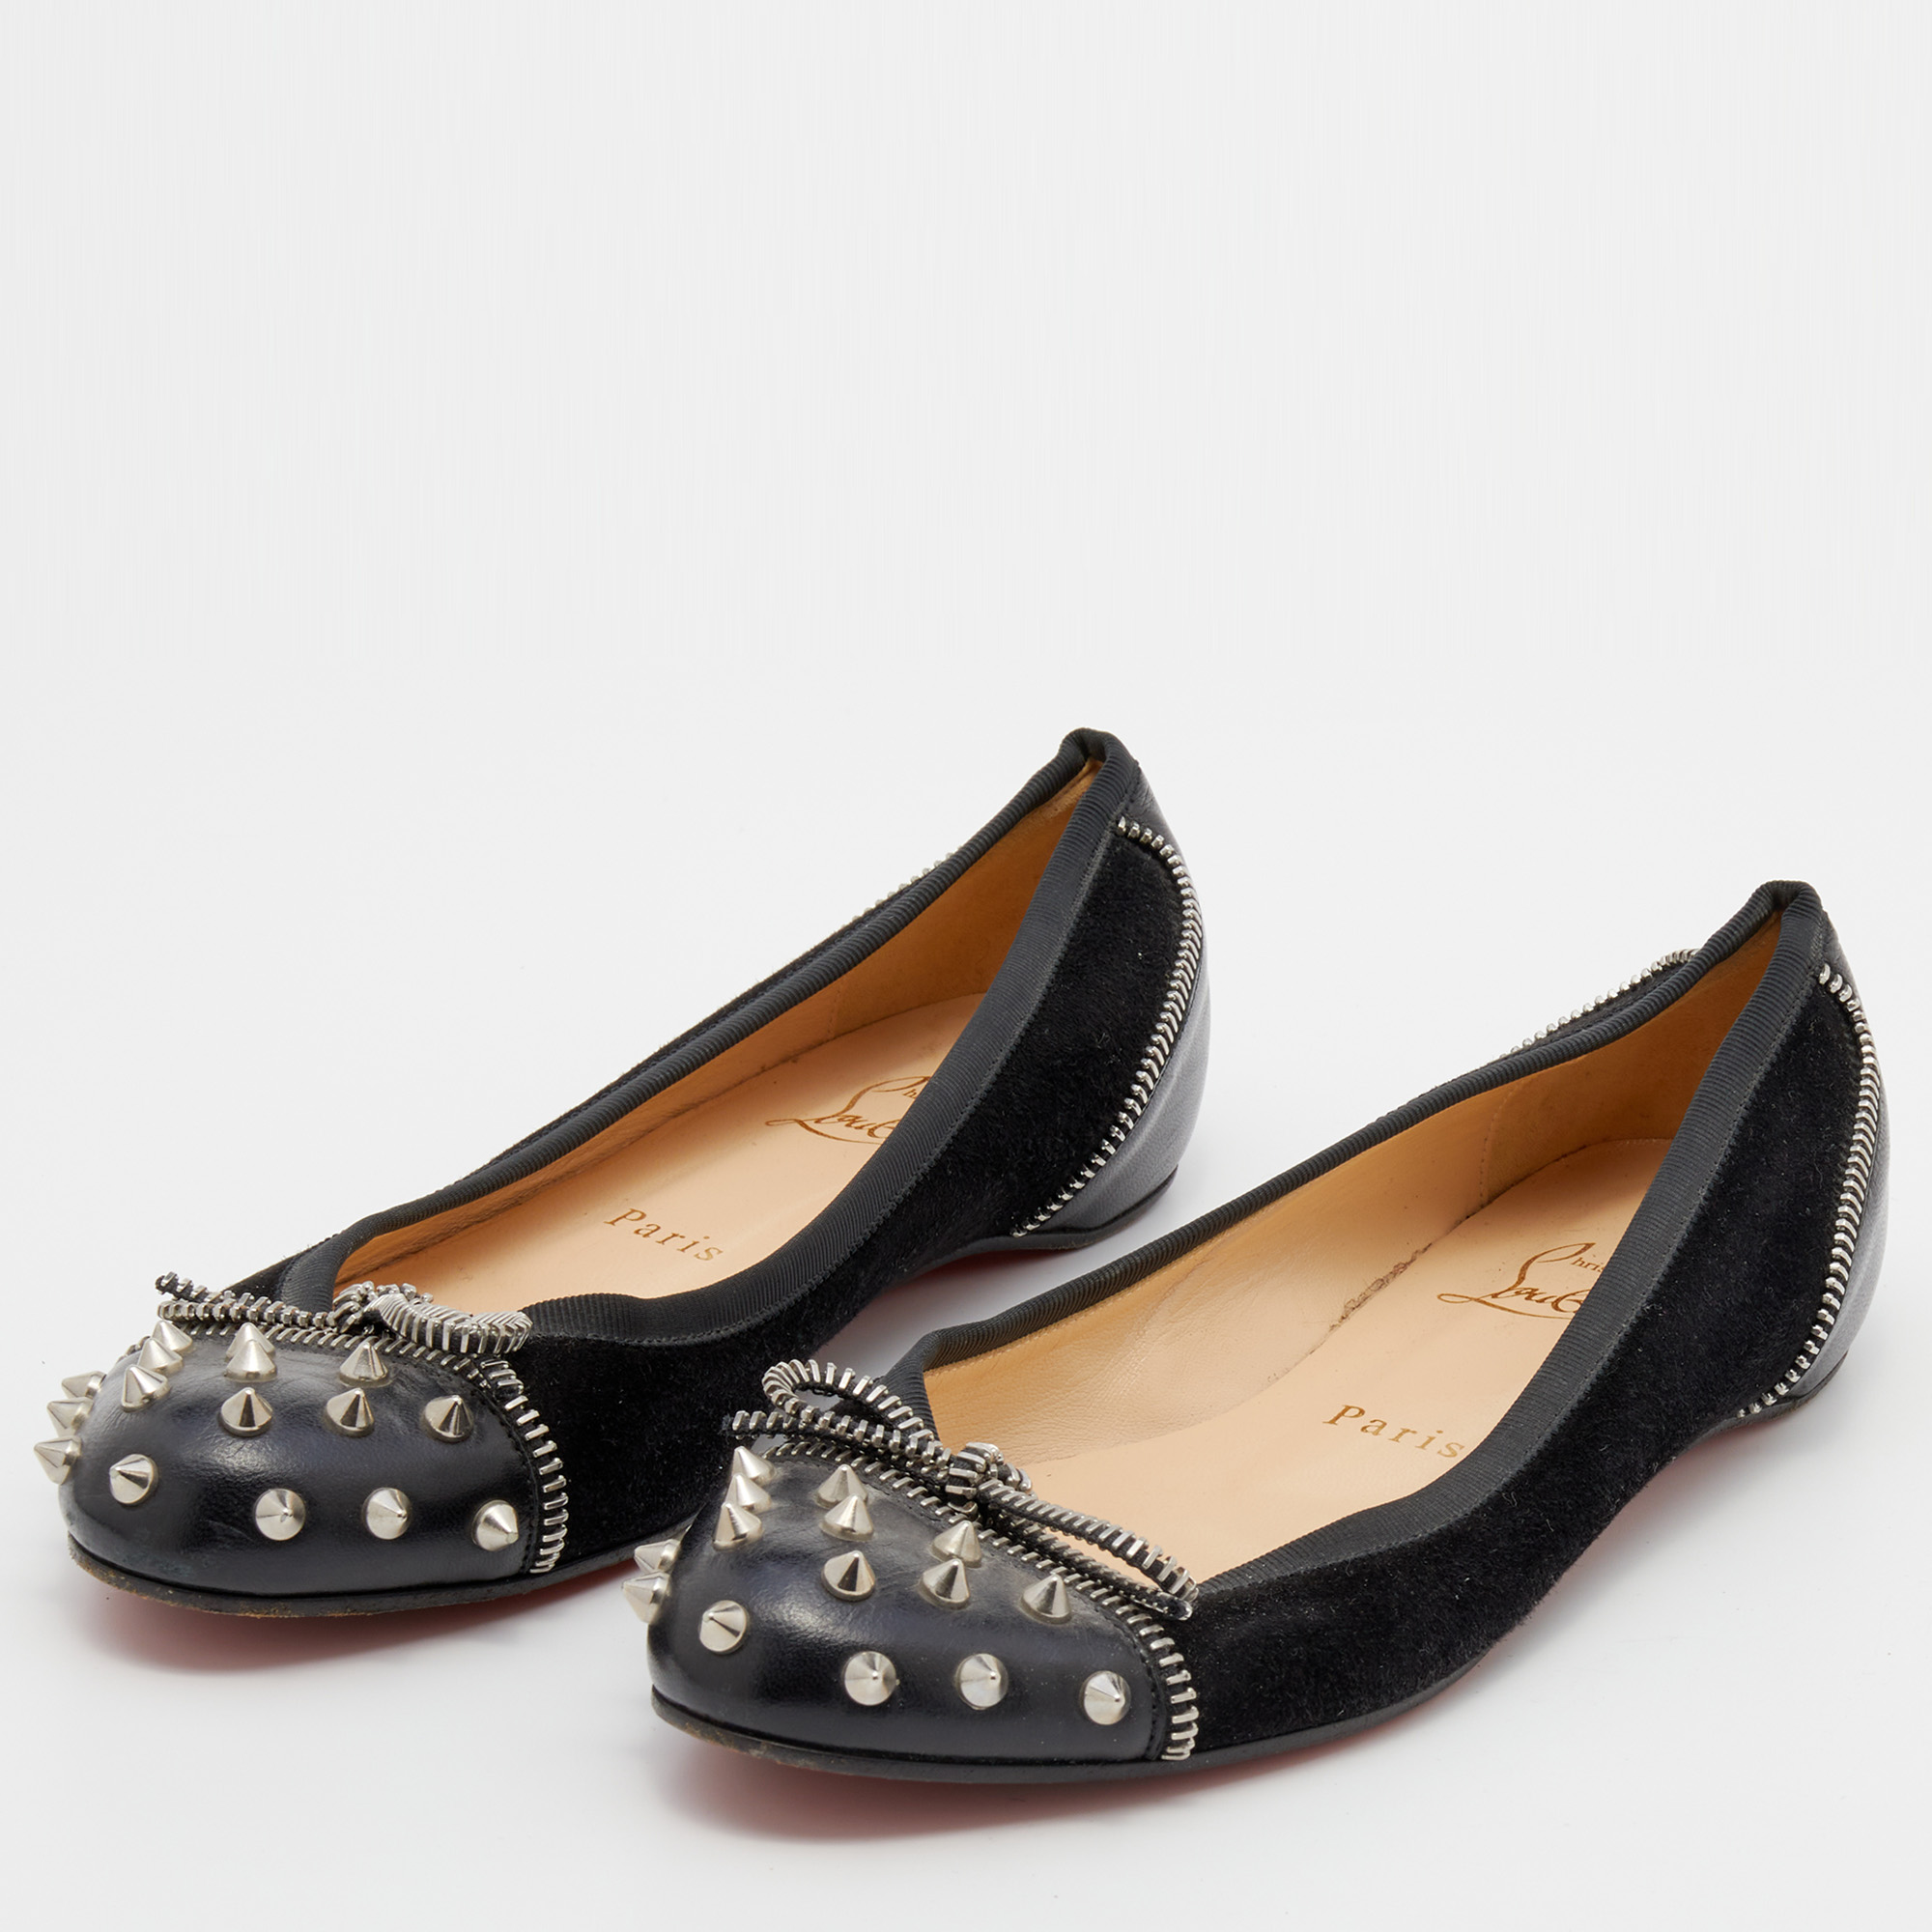 

Christian Louboutin Black Suede and Leather Spiked Zipper Ballet Flats Size